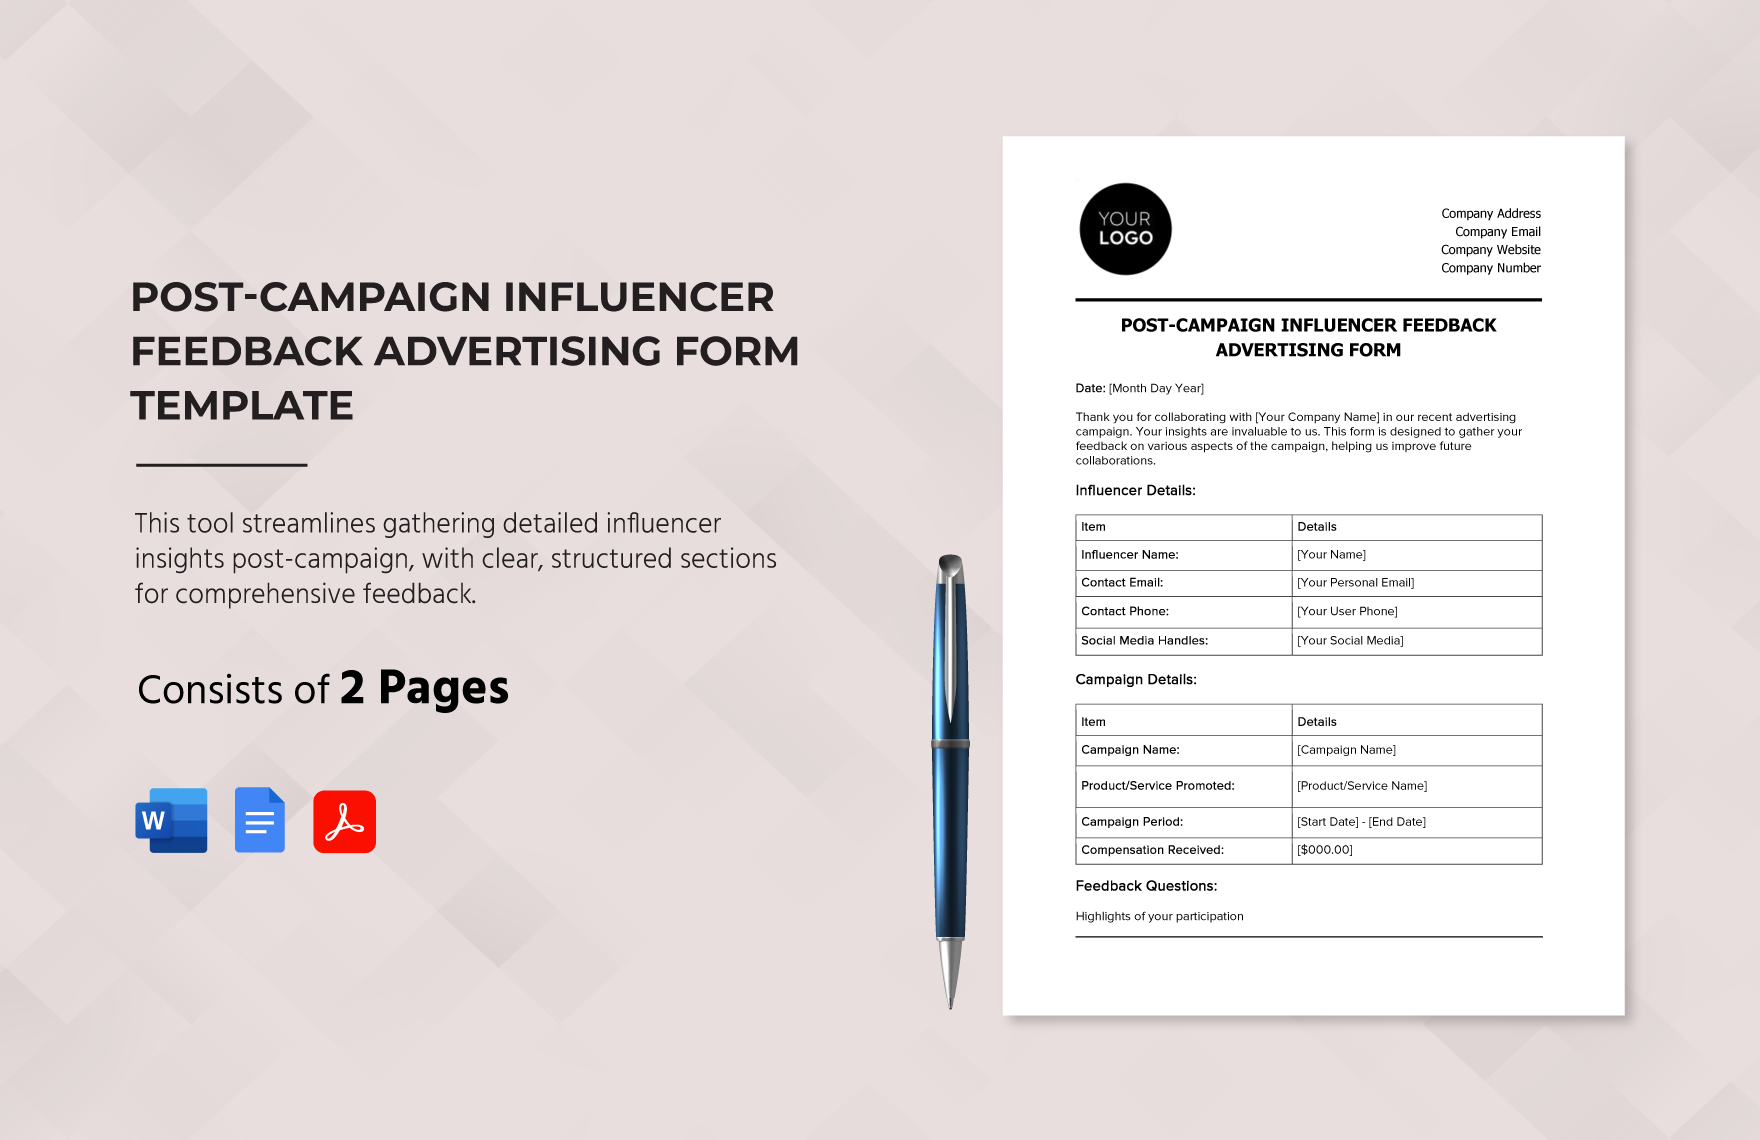 Post-Campaign Influencer Feedback Advertising Form Template